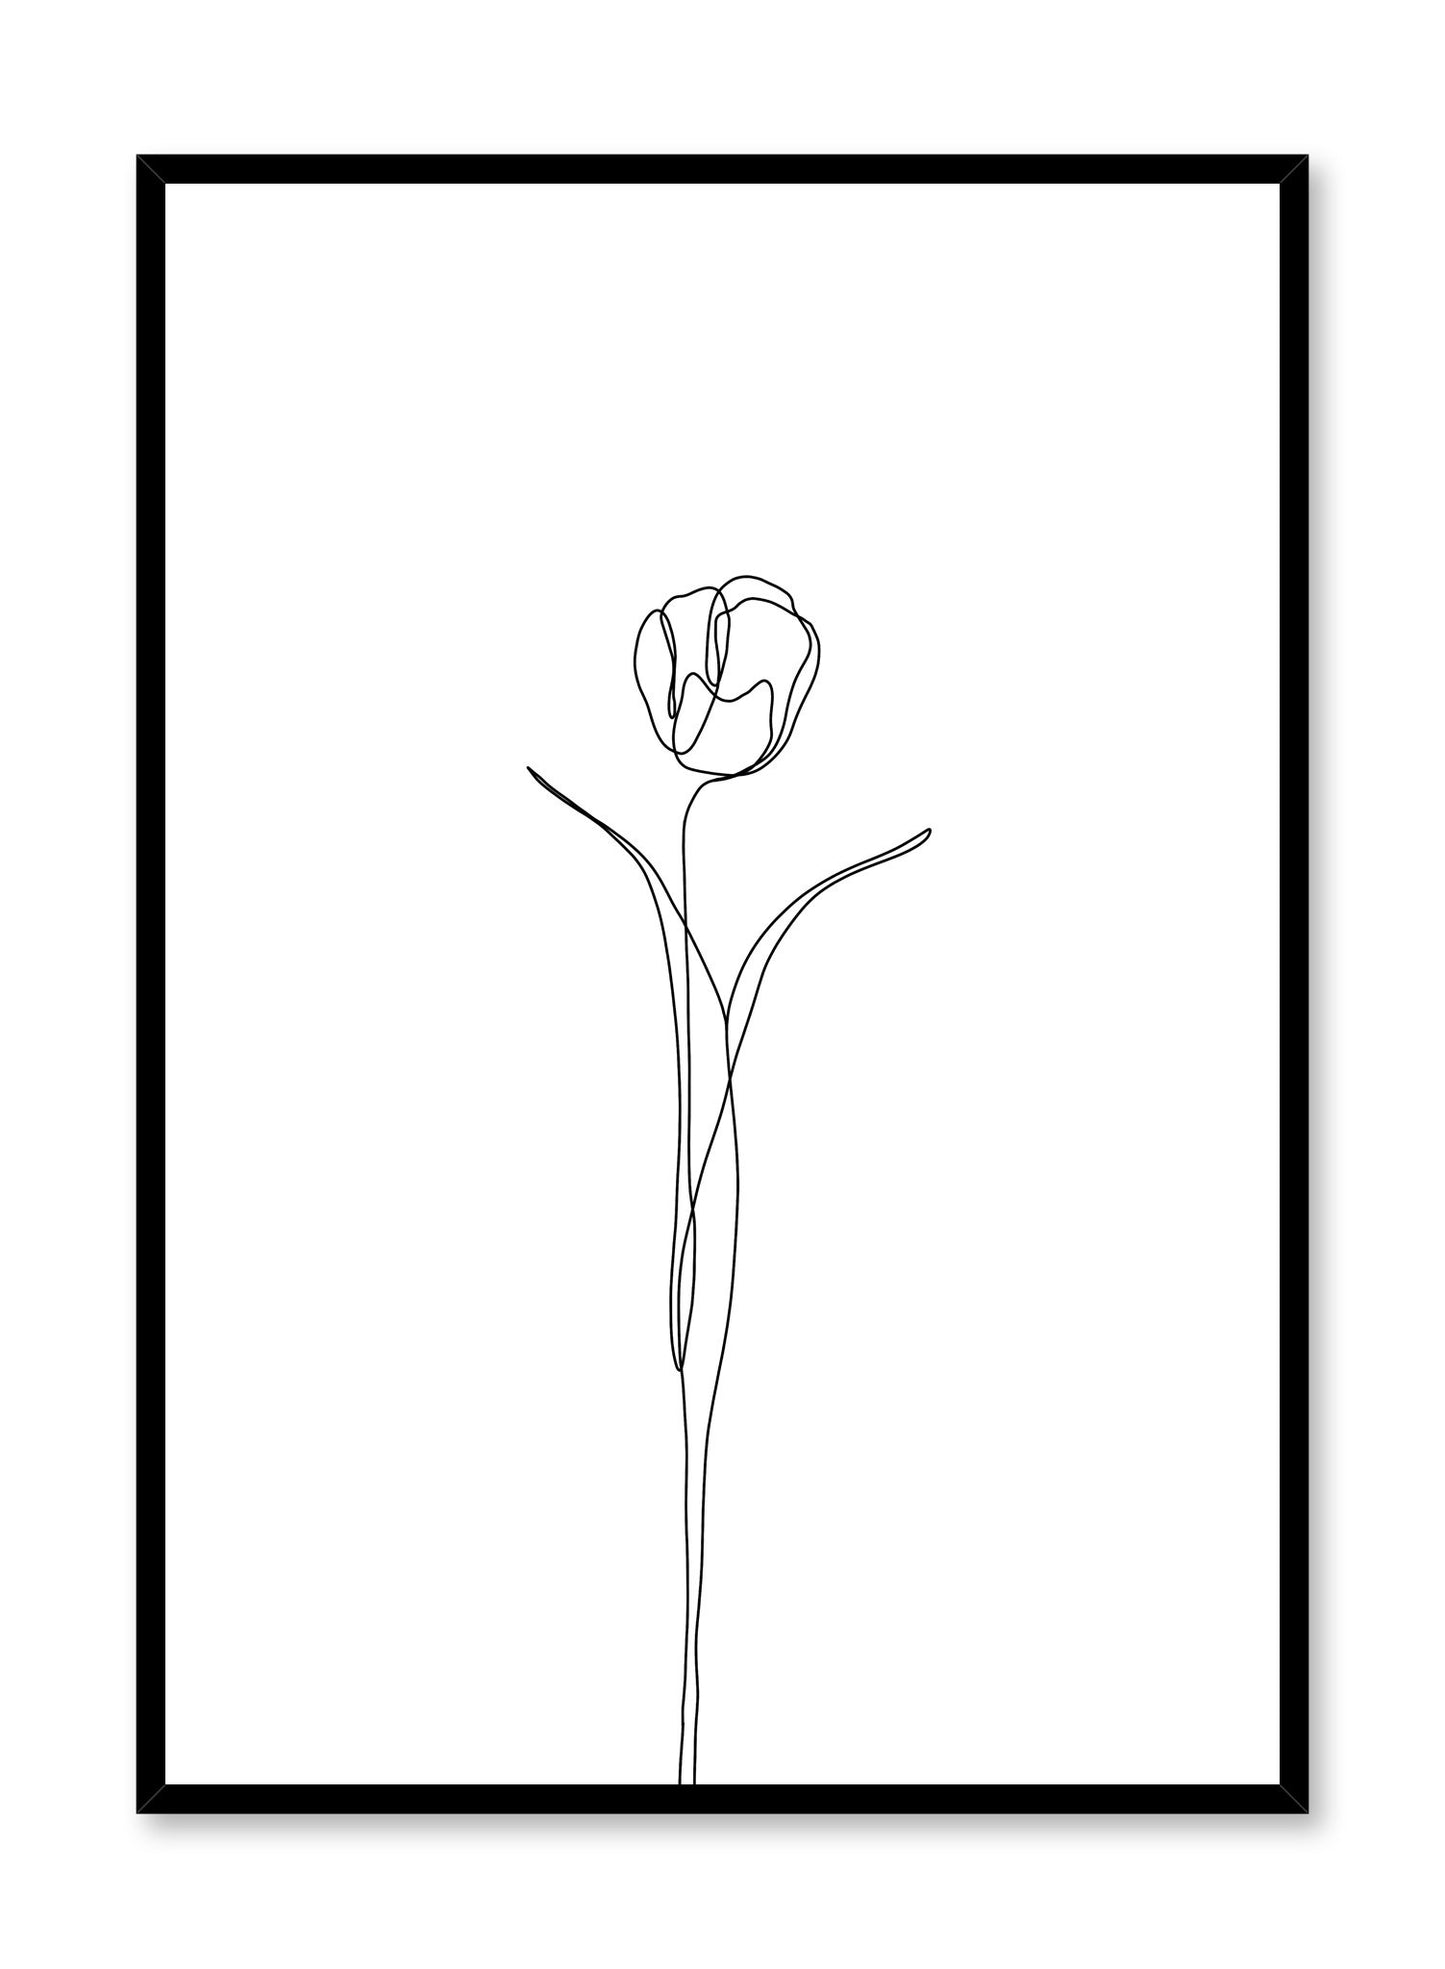 Modern minimalist poster by Opposite Wall with abstract illustration of Tulip